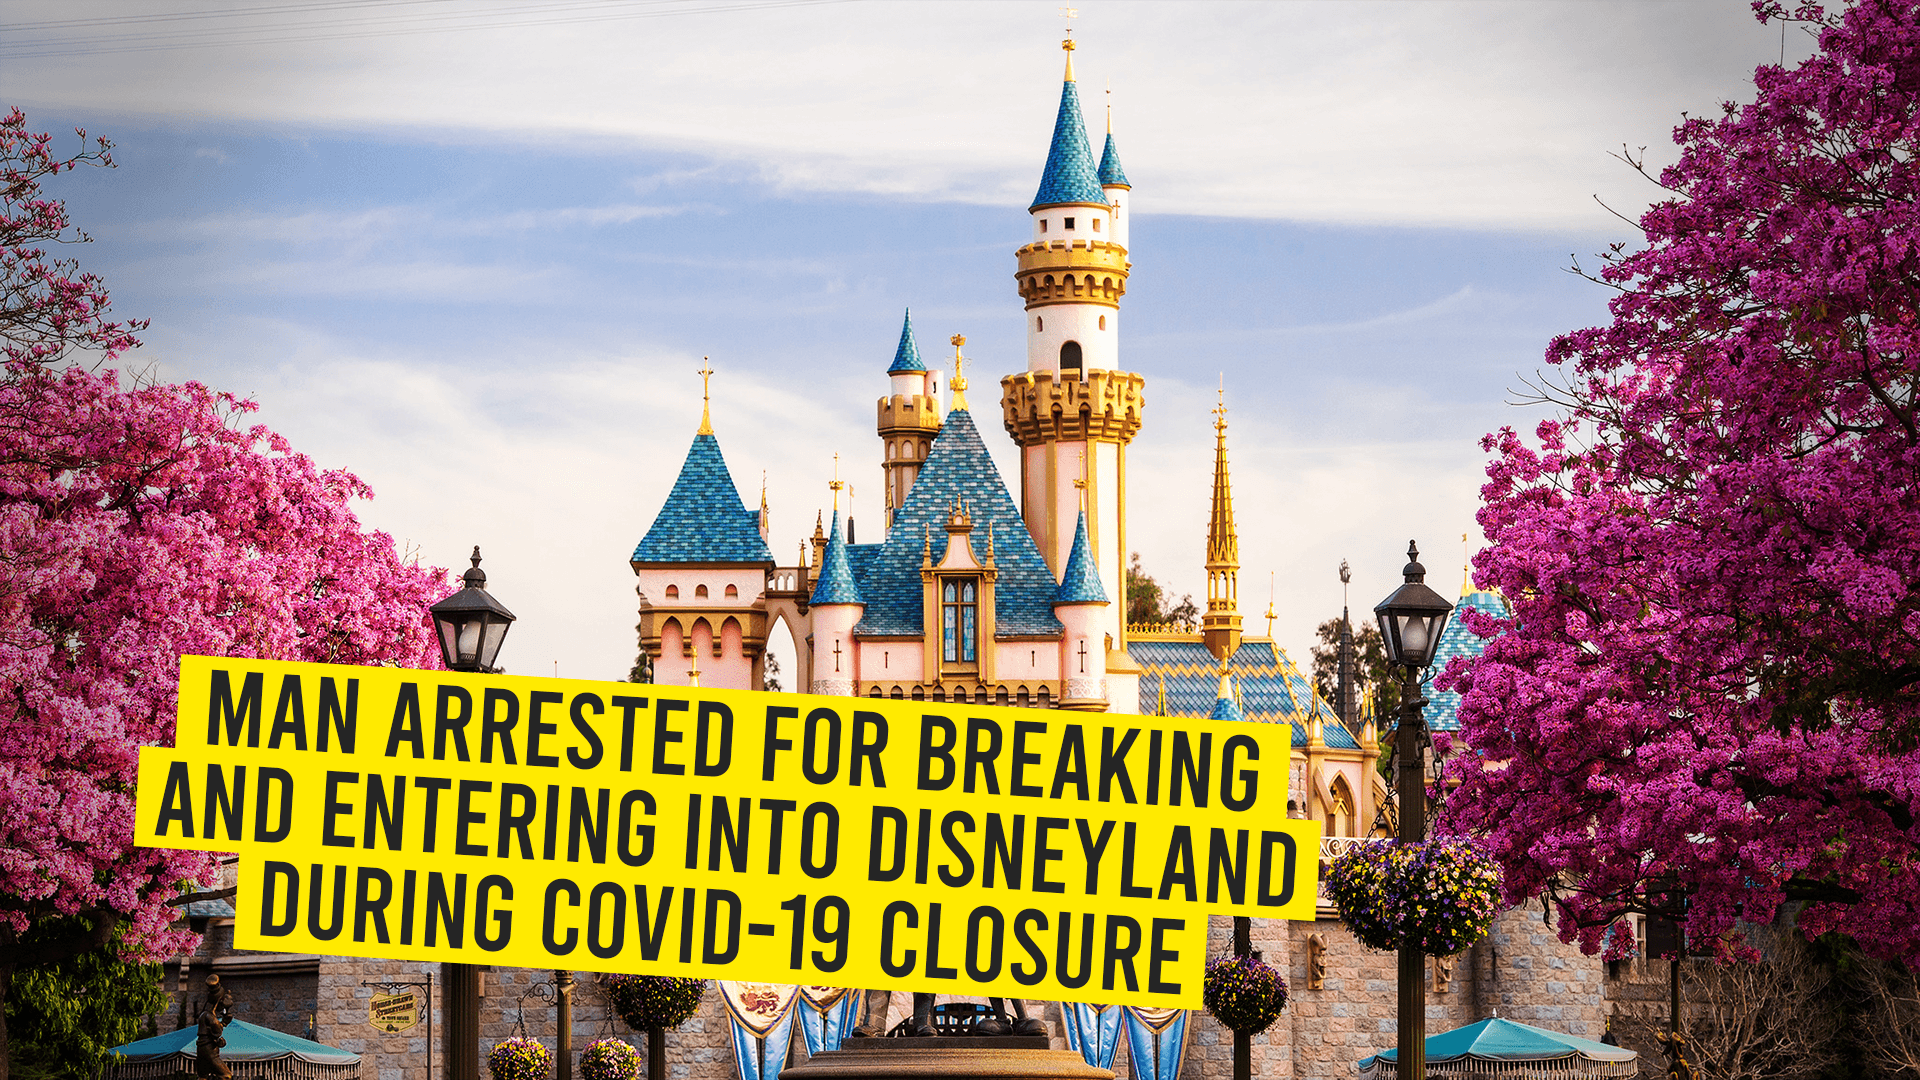 01 Man Arrested For Breaking And Entering Into Disneyland During COVID 19 Closure